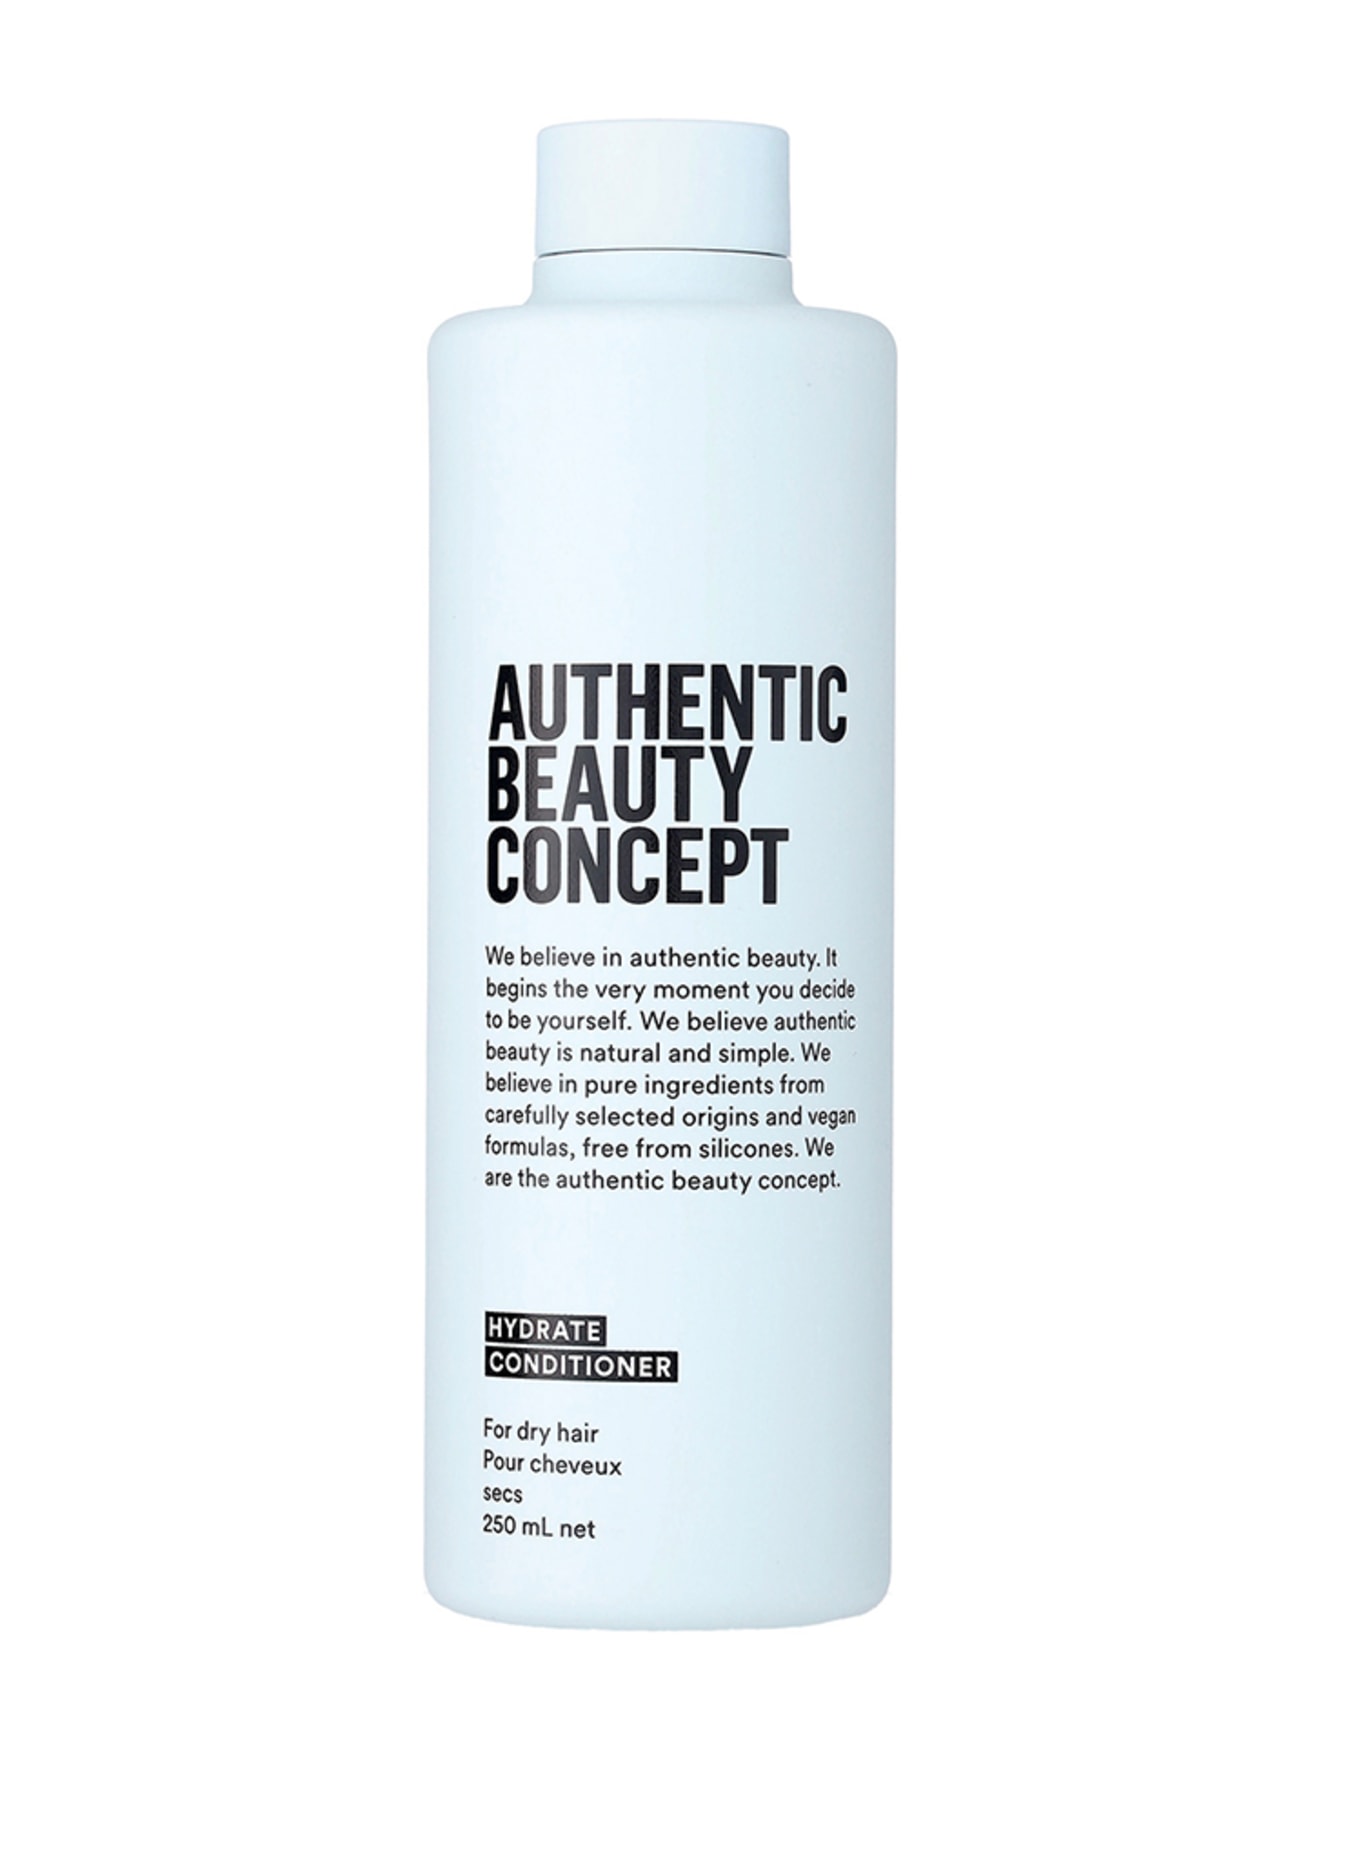 AUTHENTIC BEAUTY CONCEPT HYDRATE CONDITIONER (Obrazek 1)